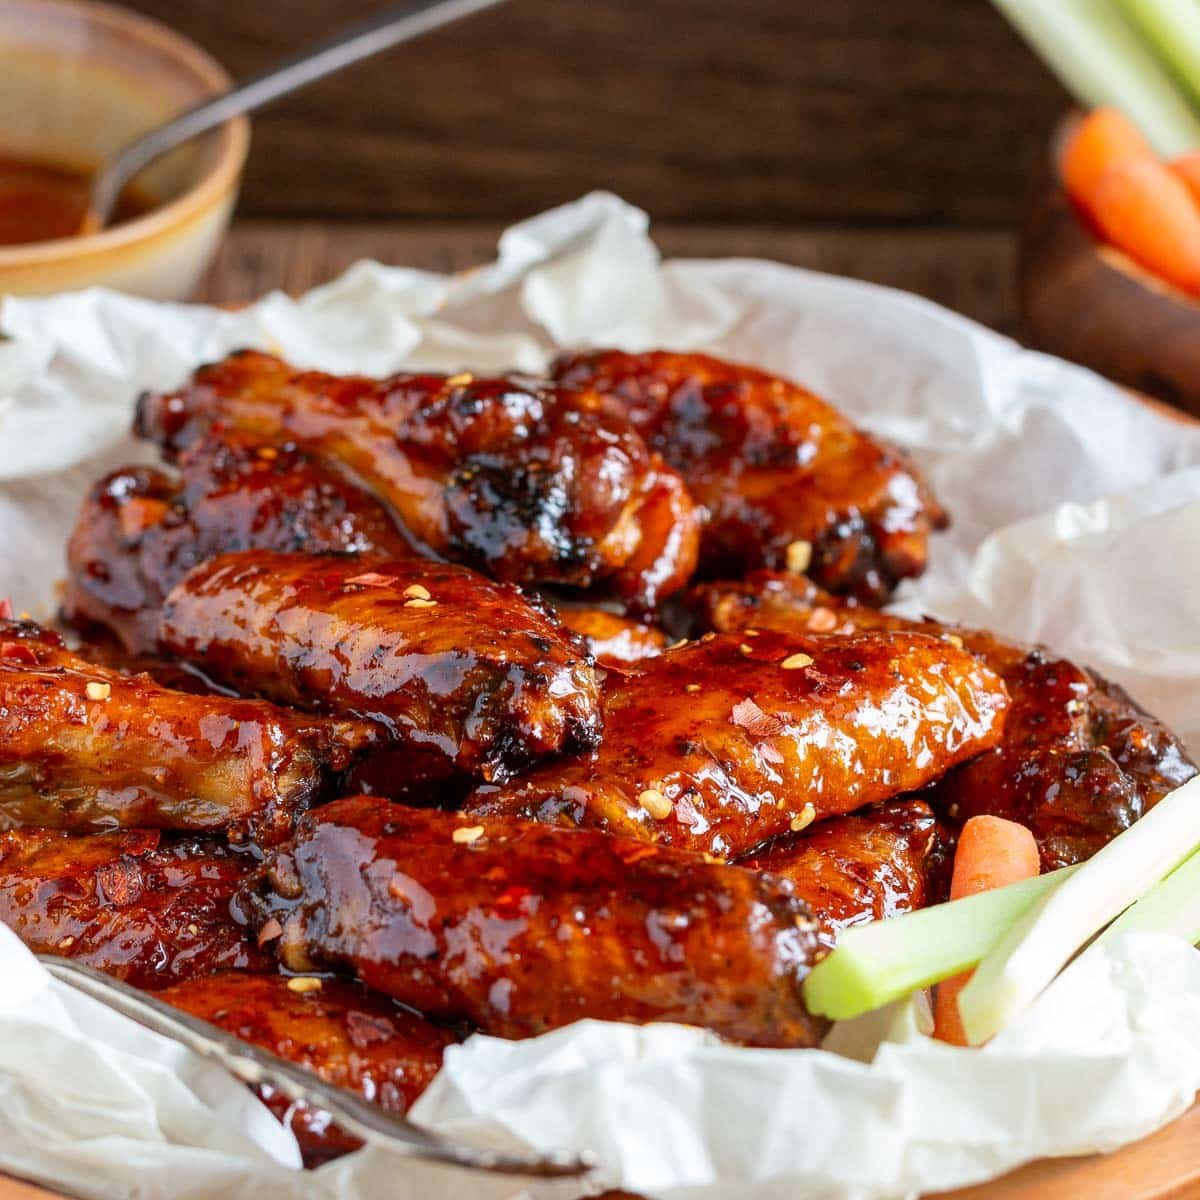 Baked honey hot wings in a plate lined with parchment paper and extra sauce on the side.